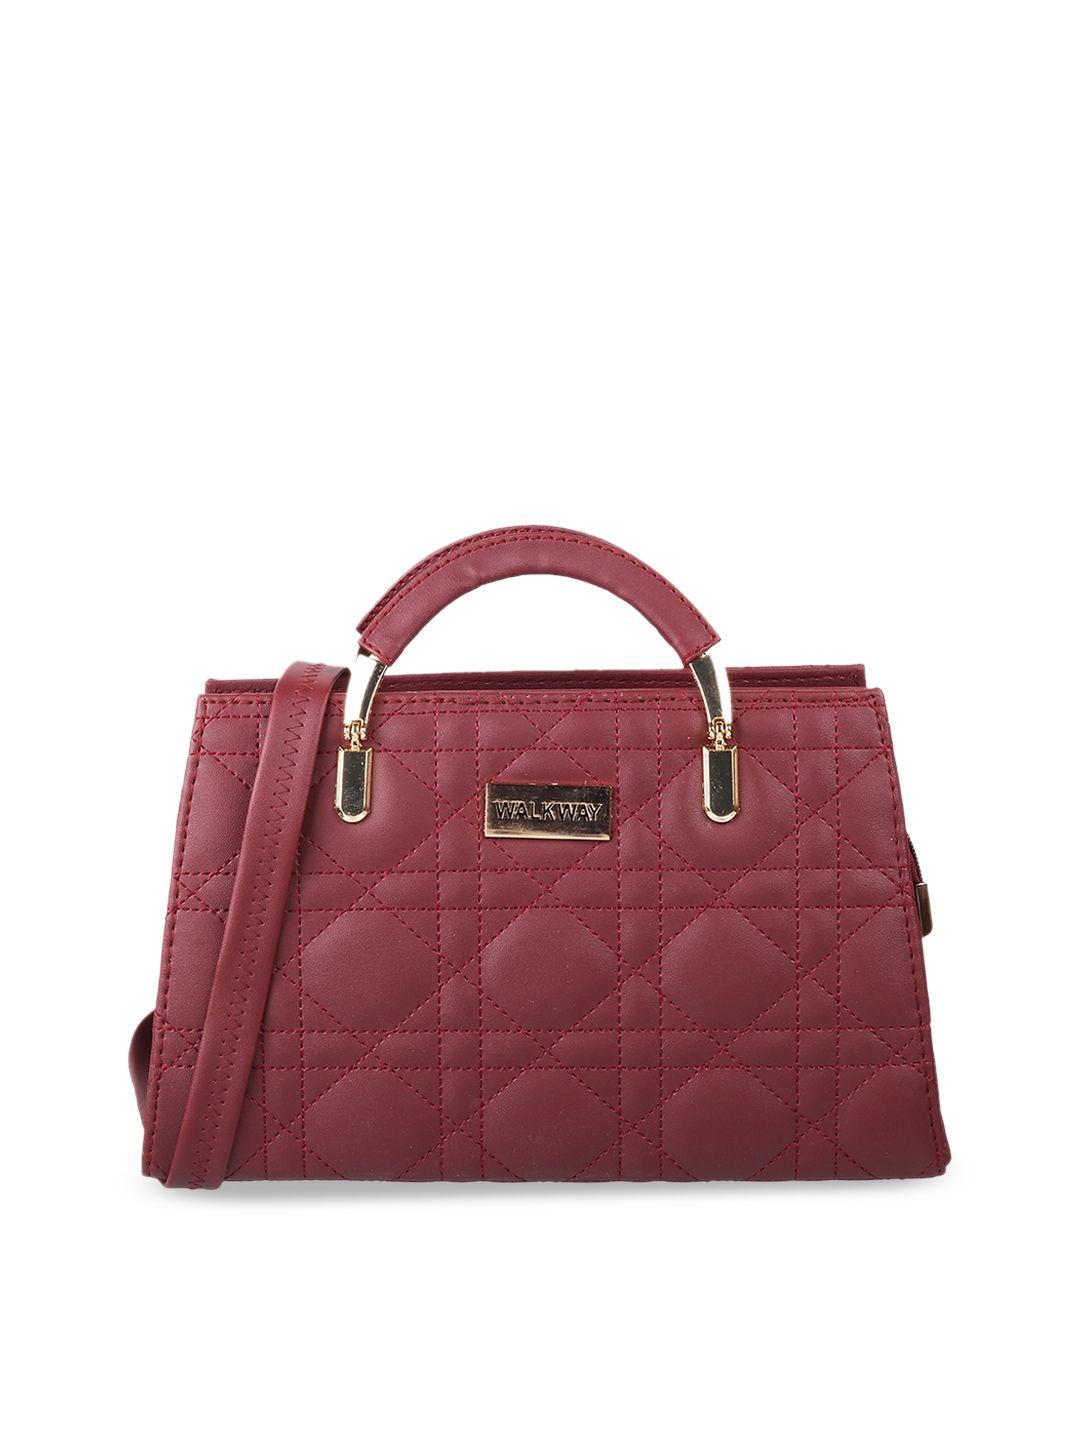 walkway by metro maroon structured handheld bag with quilted